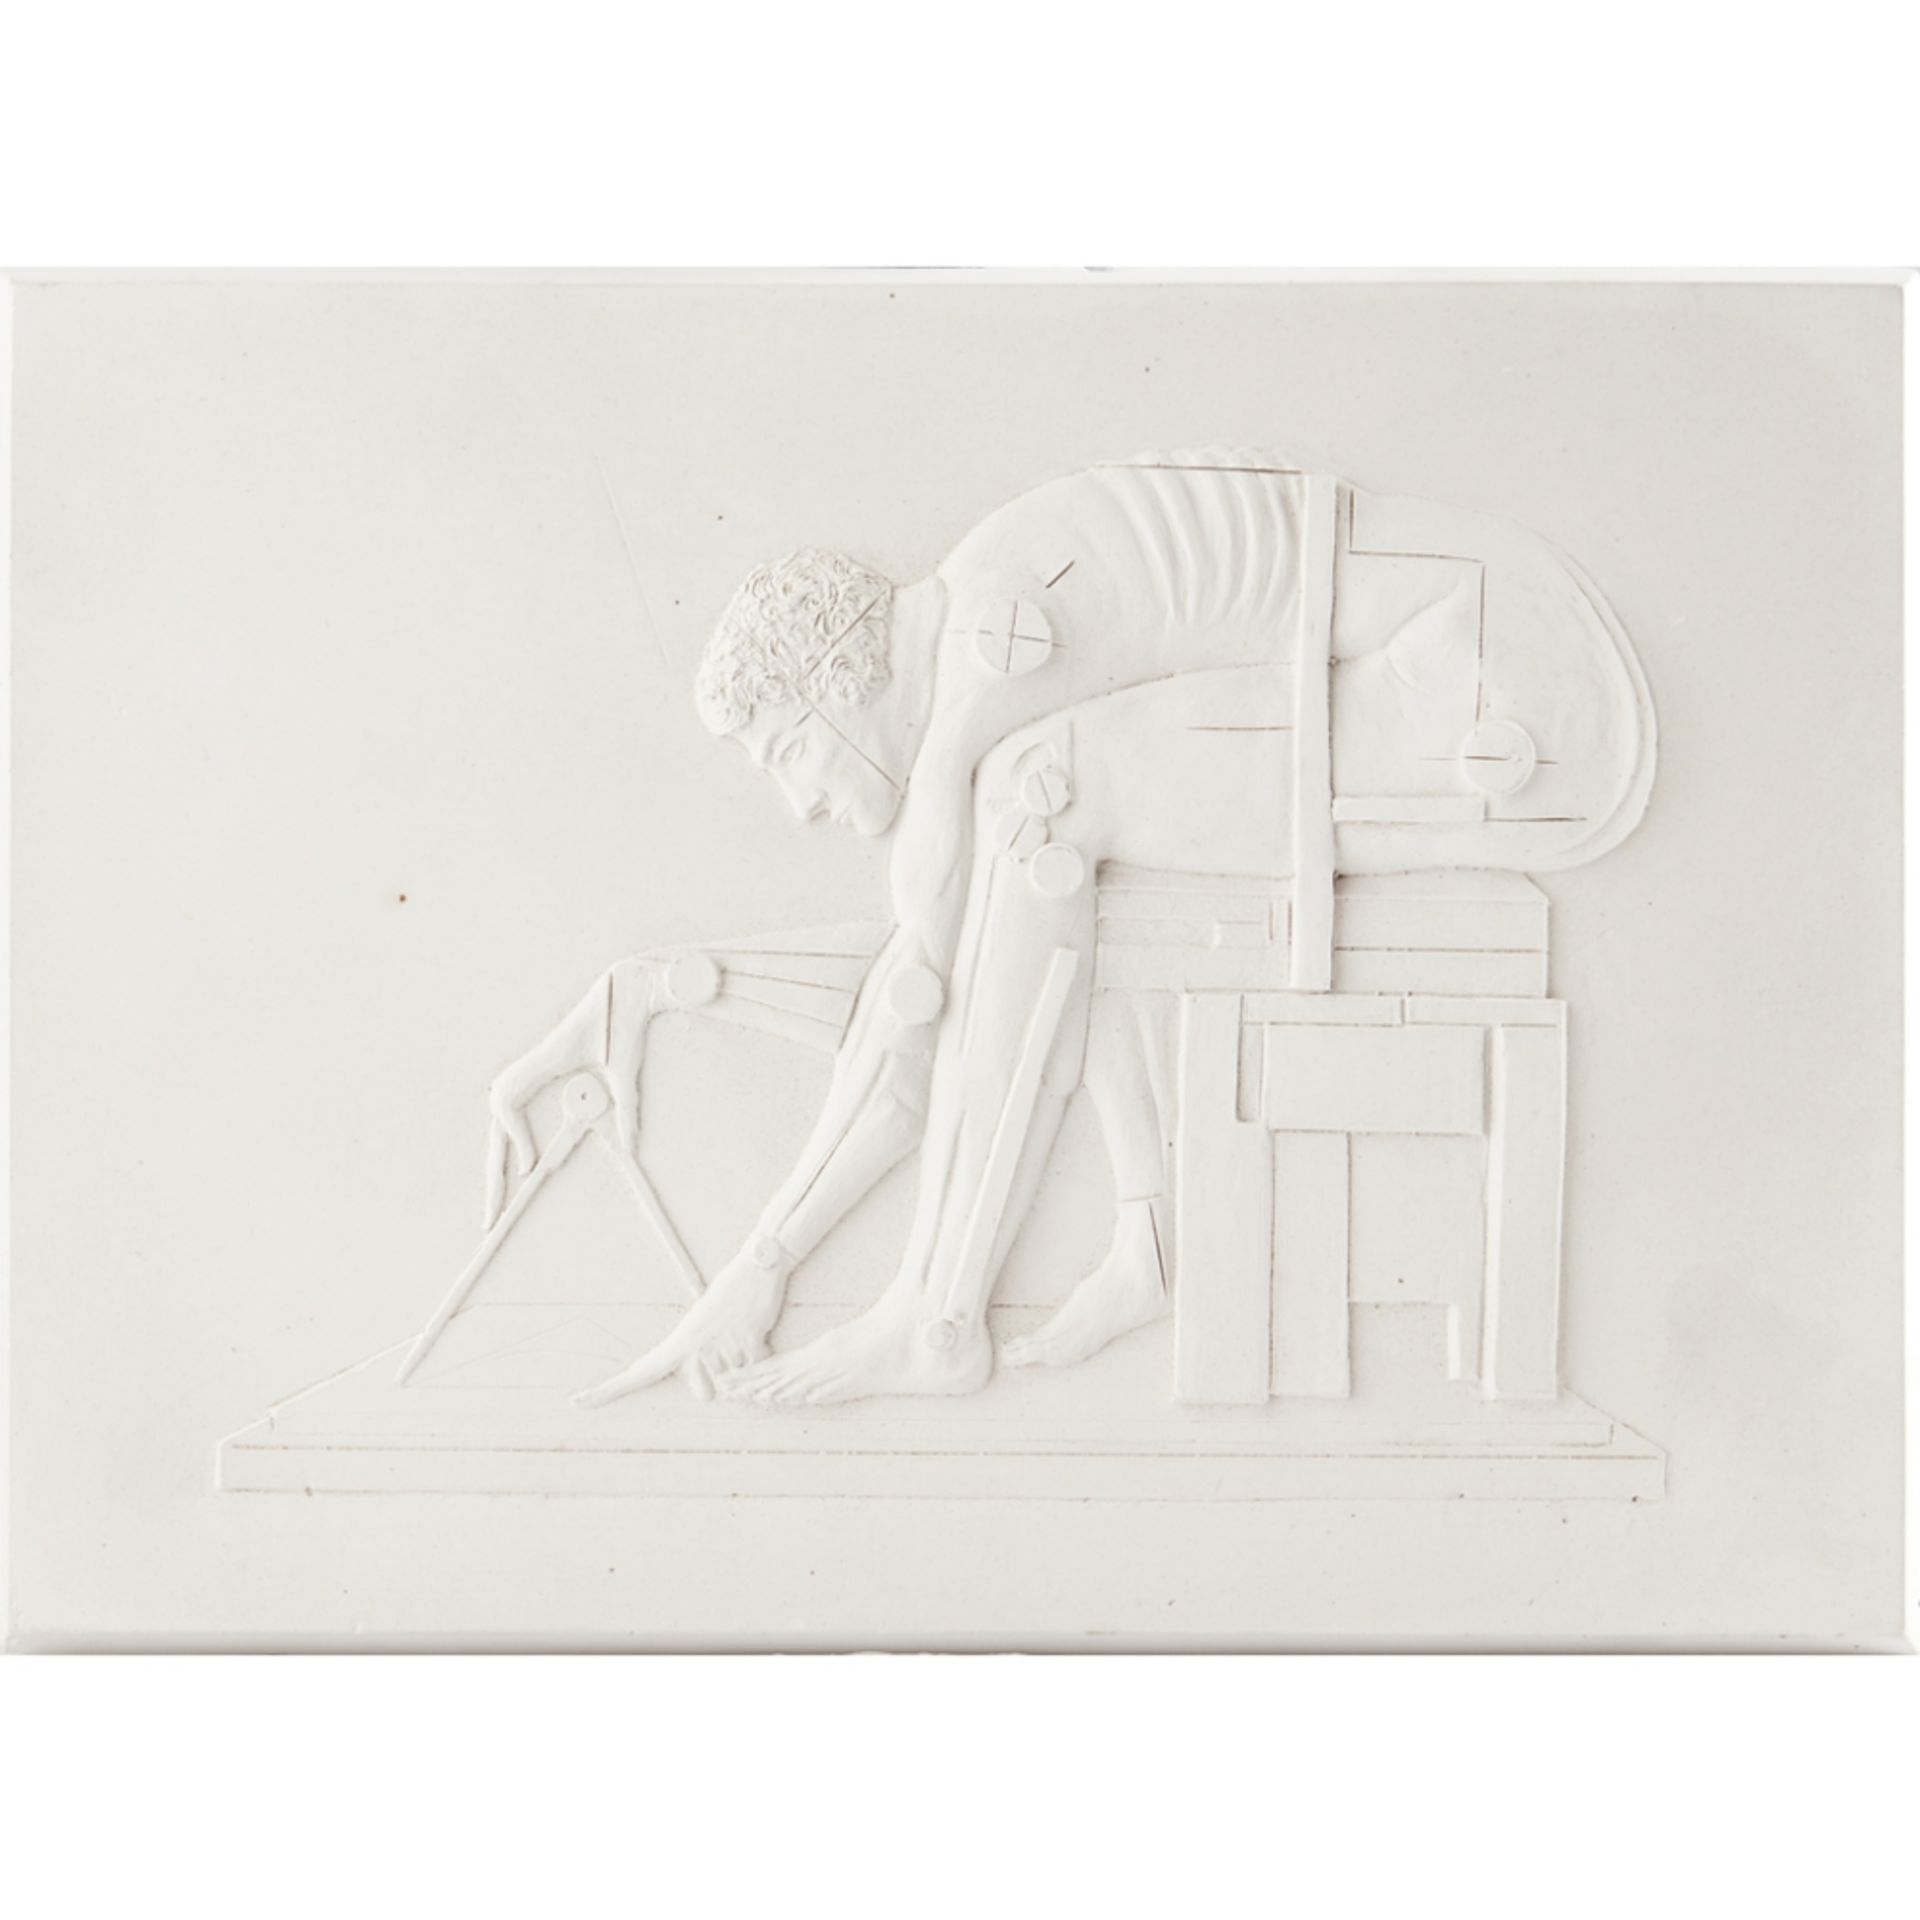 [§] SIR EDUARDO PAOLOZZI K.B.E., R.A., H.R.S.A. (SCOTTISH 1924-2005)NEWTON AFTER BLAKE Plaster, in - Image 2 of 2